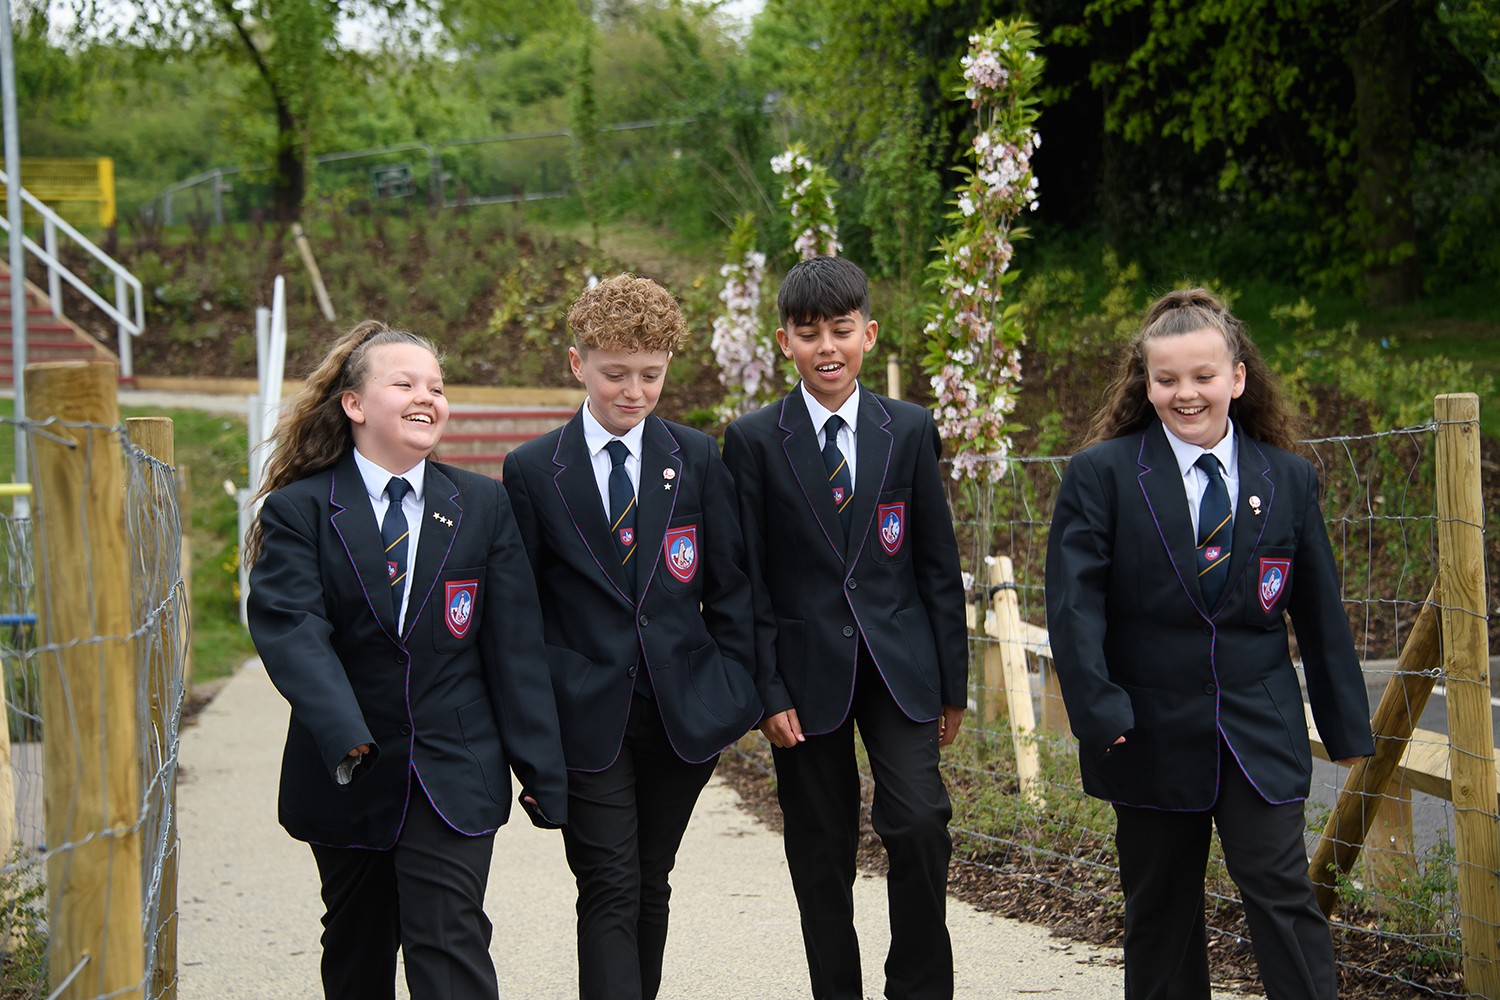 Four students talking and smiling while walking through the school grounds